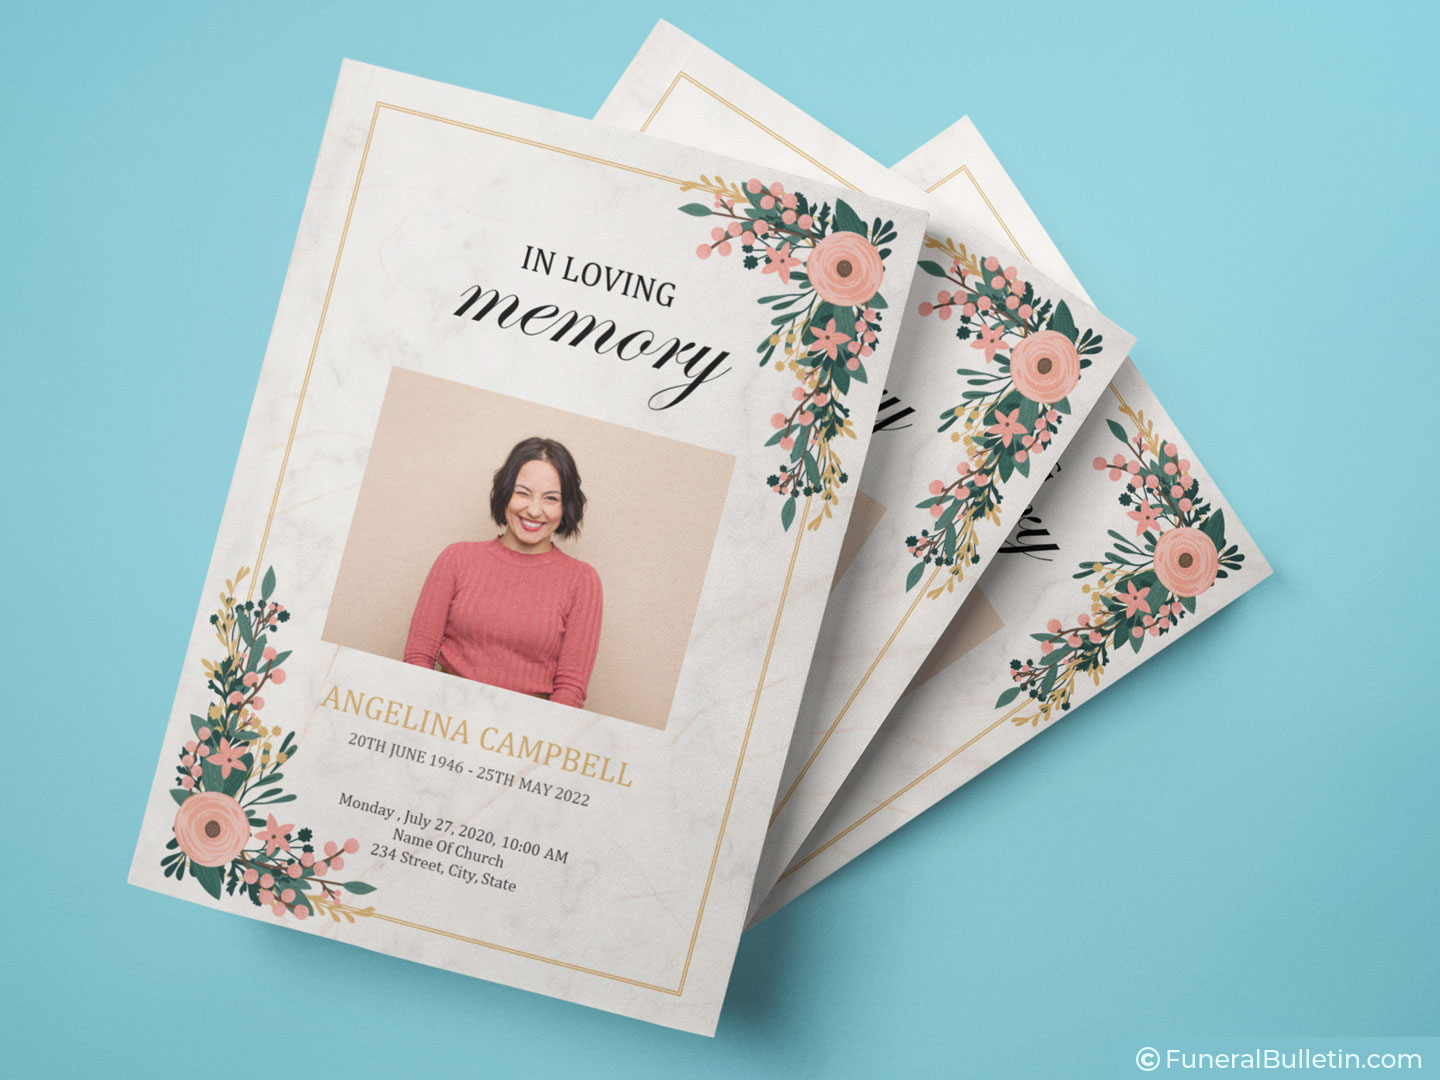 Printable Funeral Order Of Service Template For Word & PowerPoint